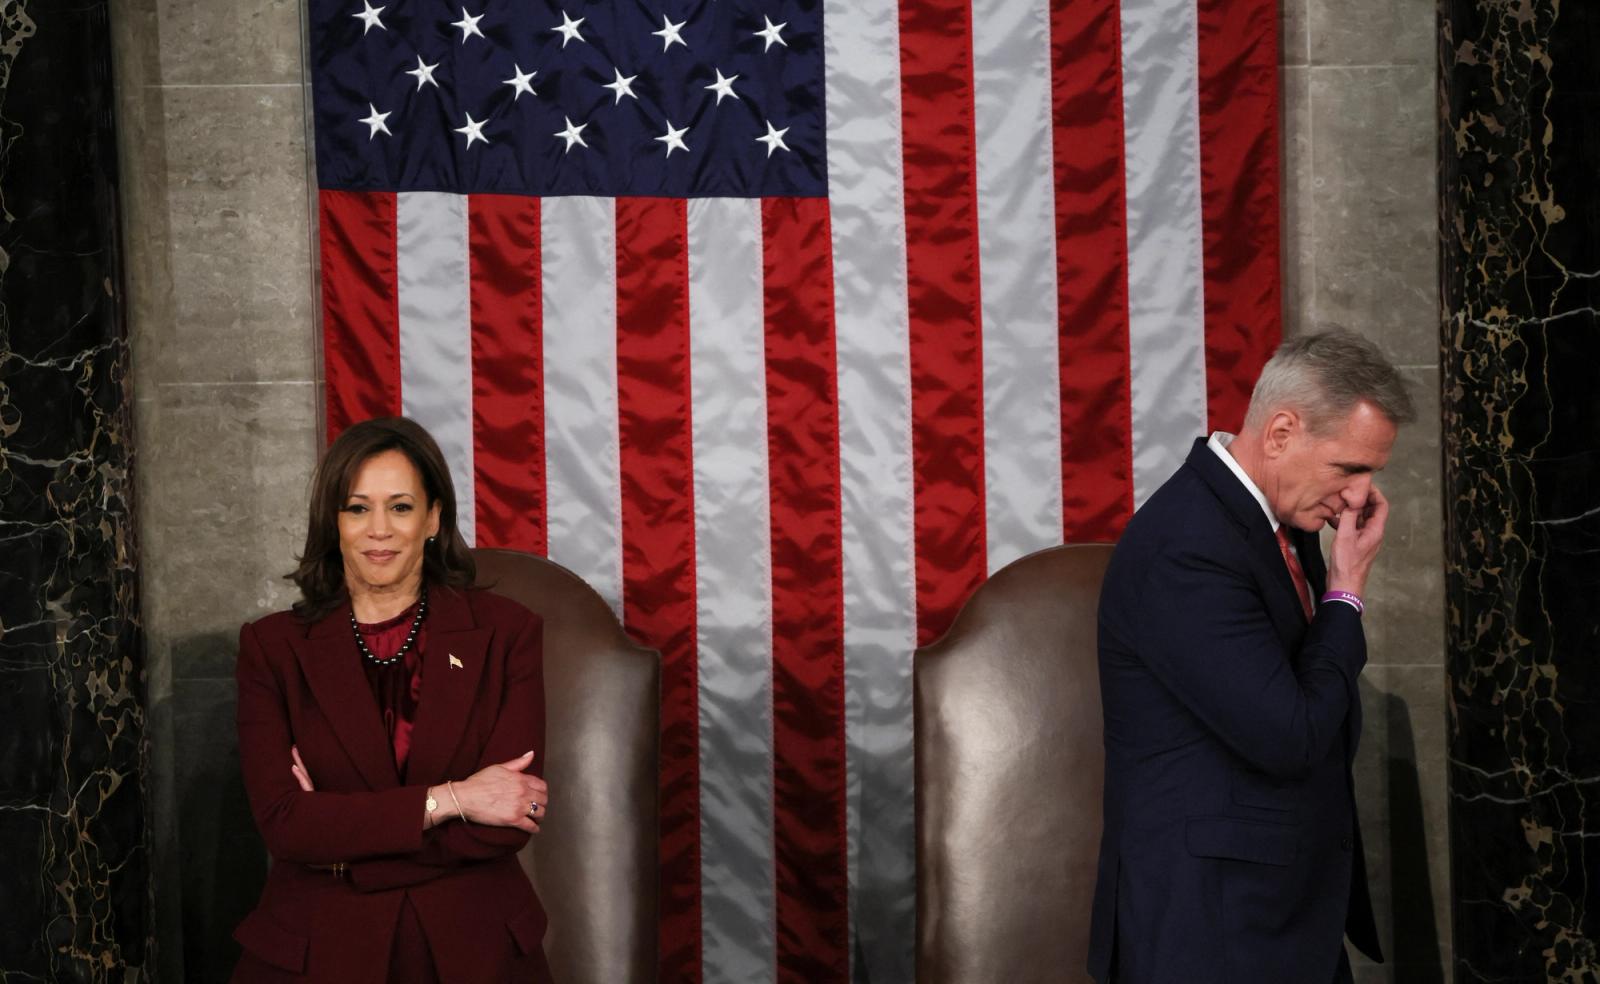 U.S. Vice President Kamala Harris and Speaker of the House Kevin McCarthy stand apart atop the dais as President Joe Biden works the crowd on his way out after the conclusion of his State of the Union address before a joint session of Congress in the House Chamber at the U.S. Capitol in Washington, U.S., February 7, 2023.